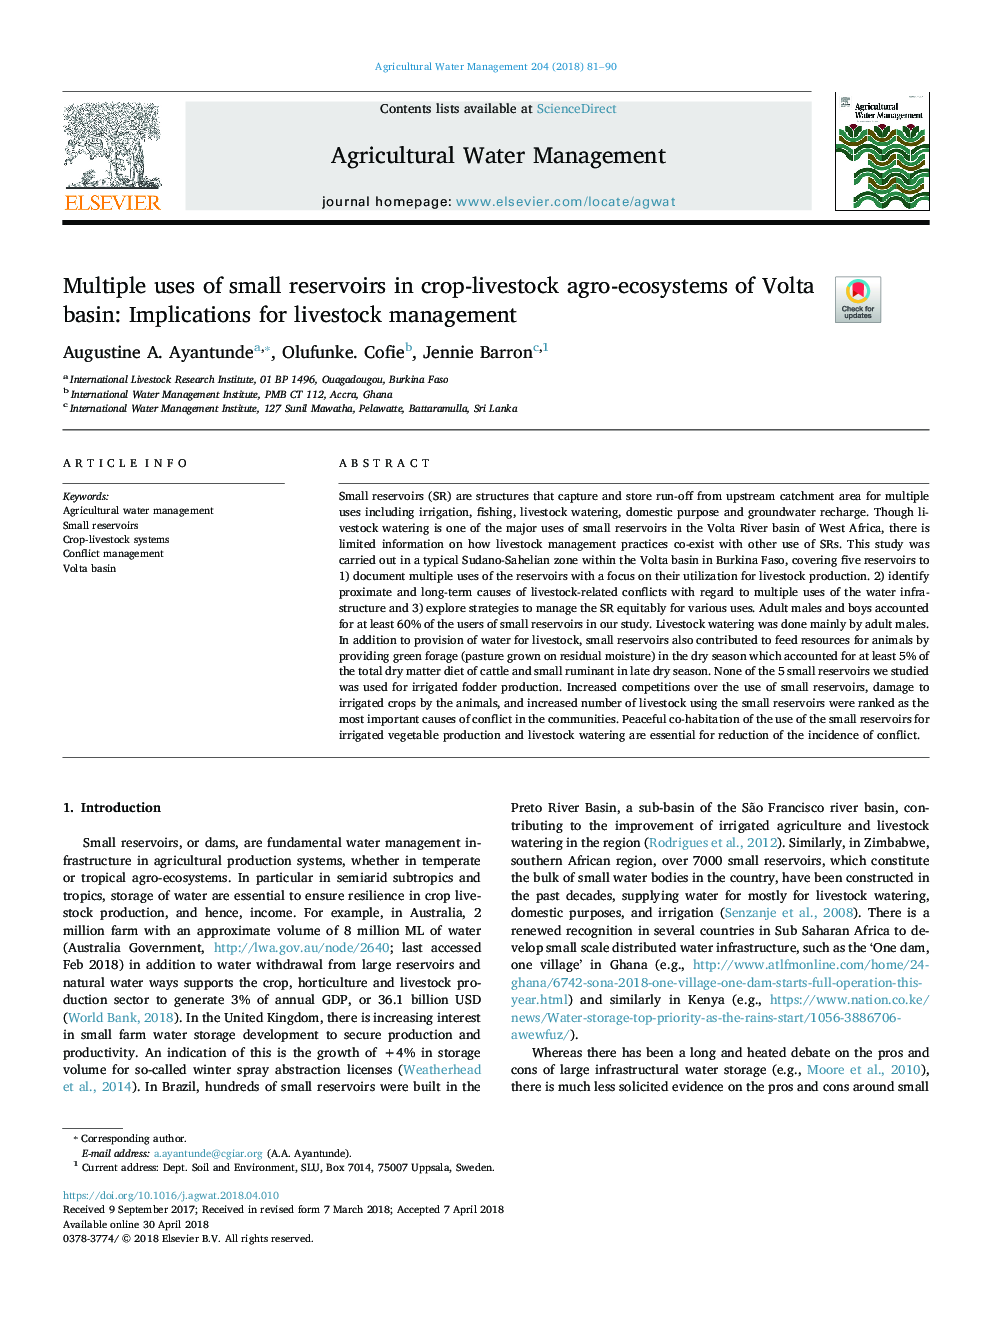 Multiple uses of small reservoirs in crop-livestock agro-ecosystems of Volta basin: Implications for livestock management